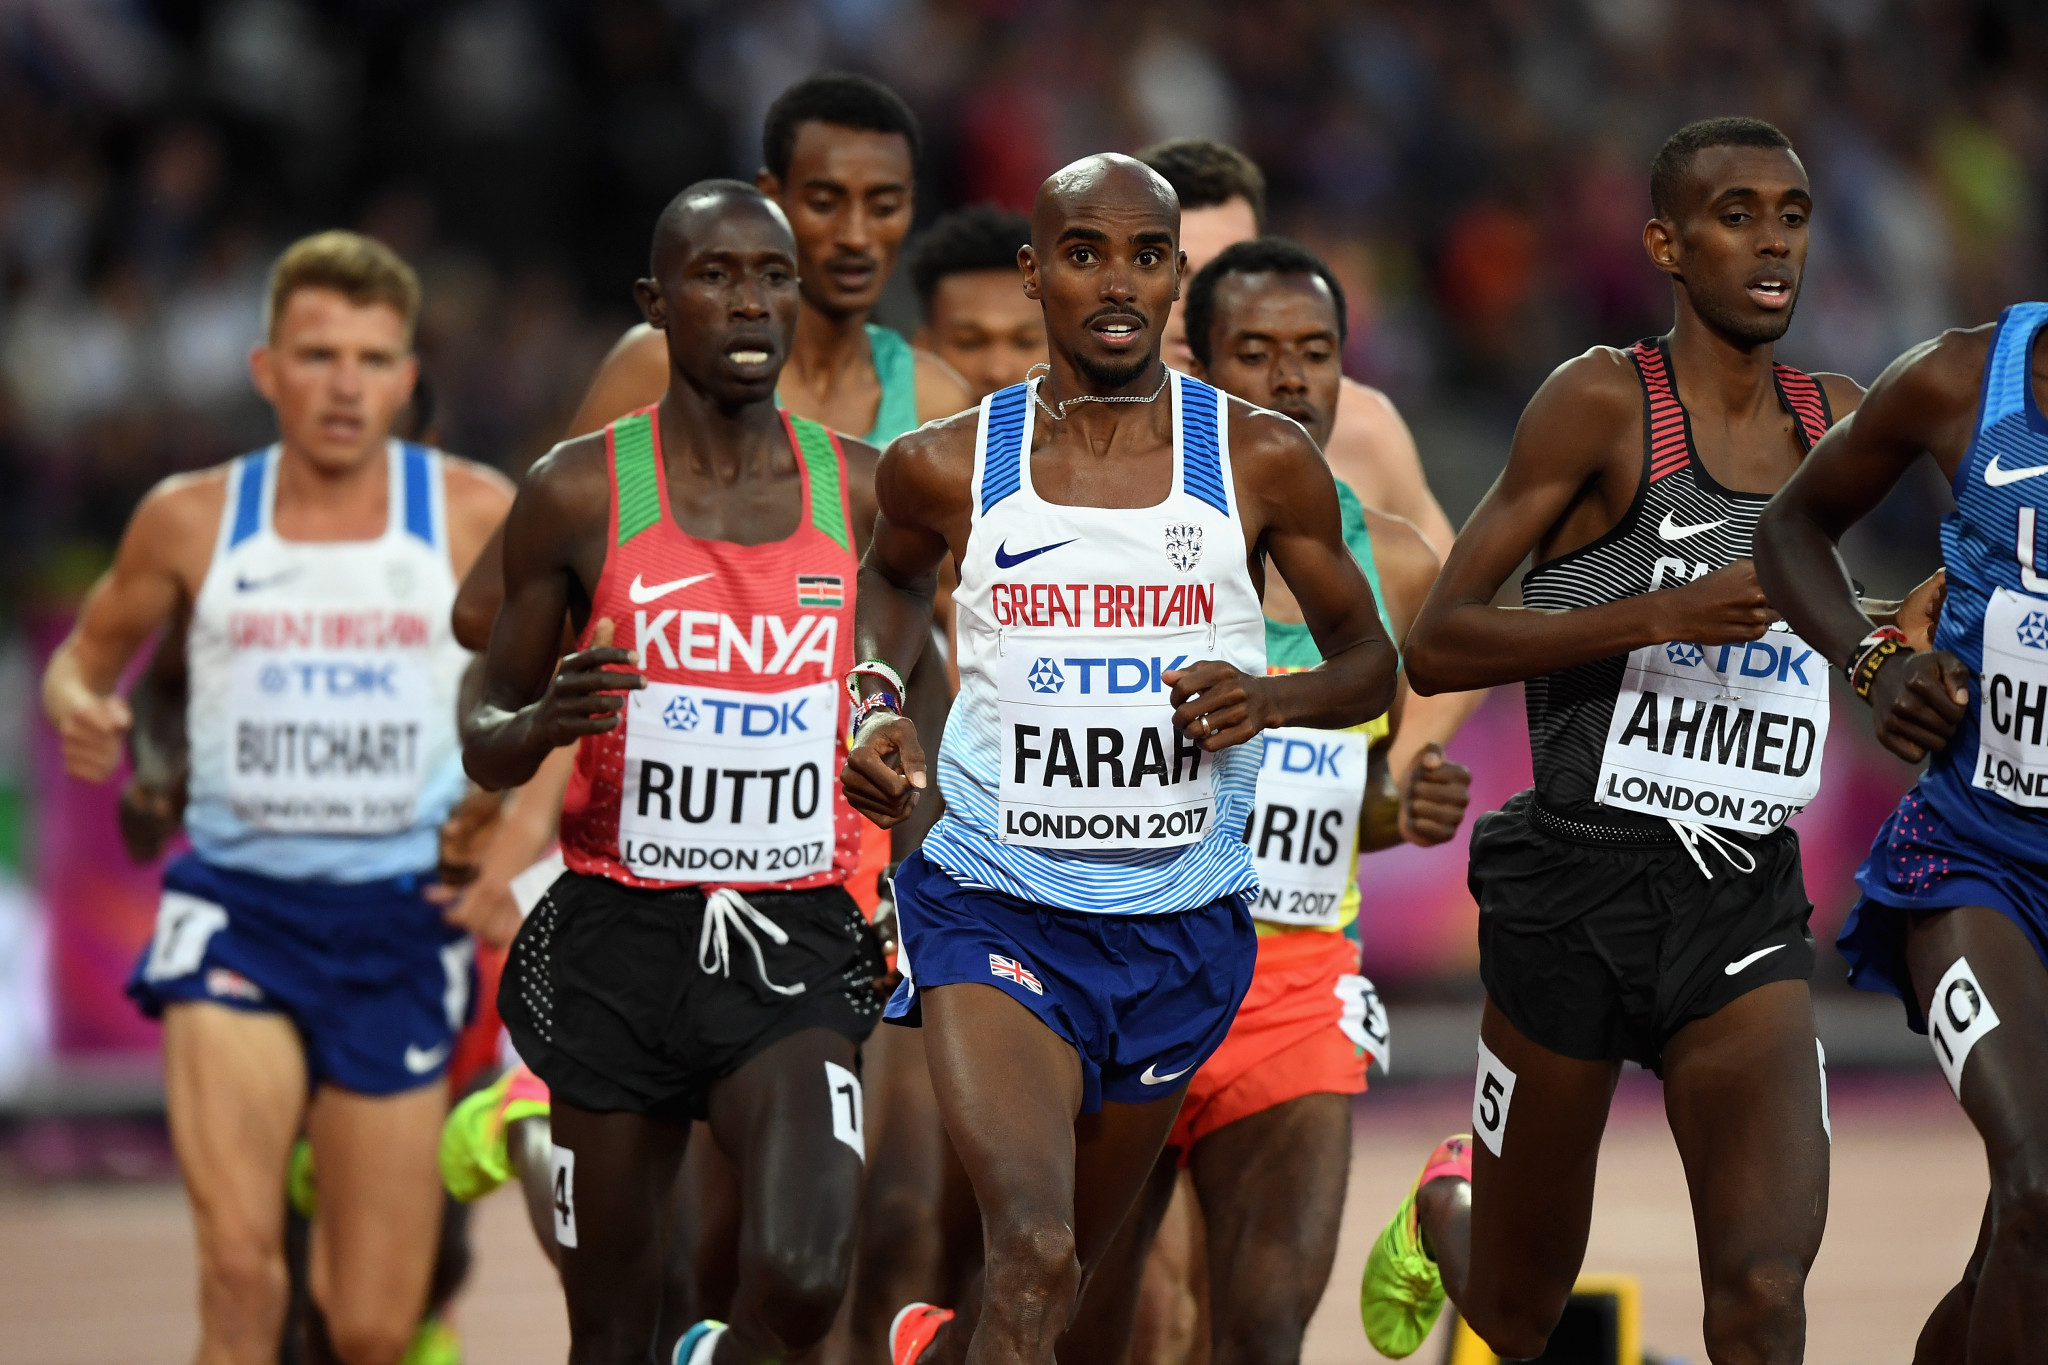 Cyrus Rutto had finished 13th in the 5,000m at the 2017 IAAF World Championships in London ©Getty Images